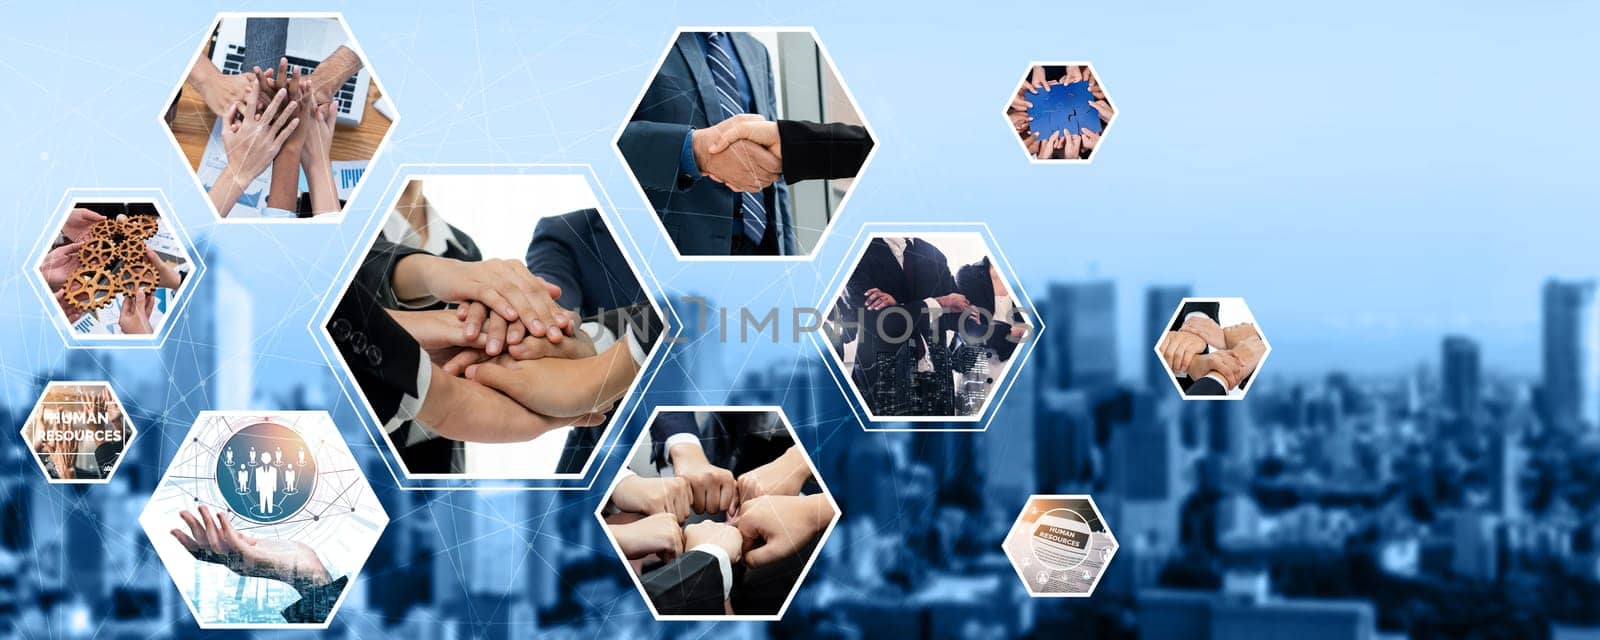 Teamwork and human resources HR management technology for business kudos by biancoblue